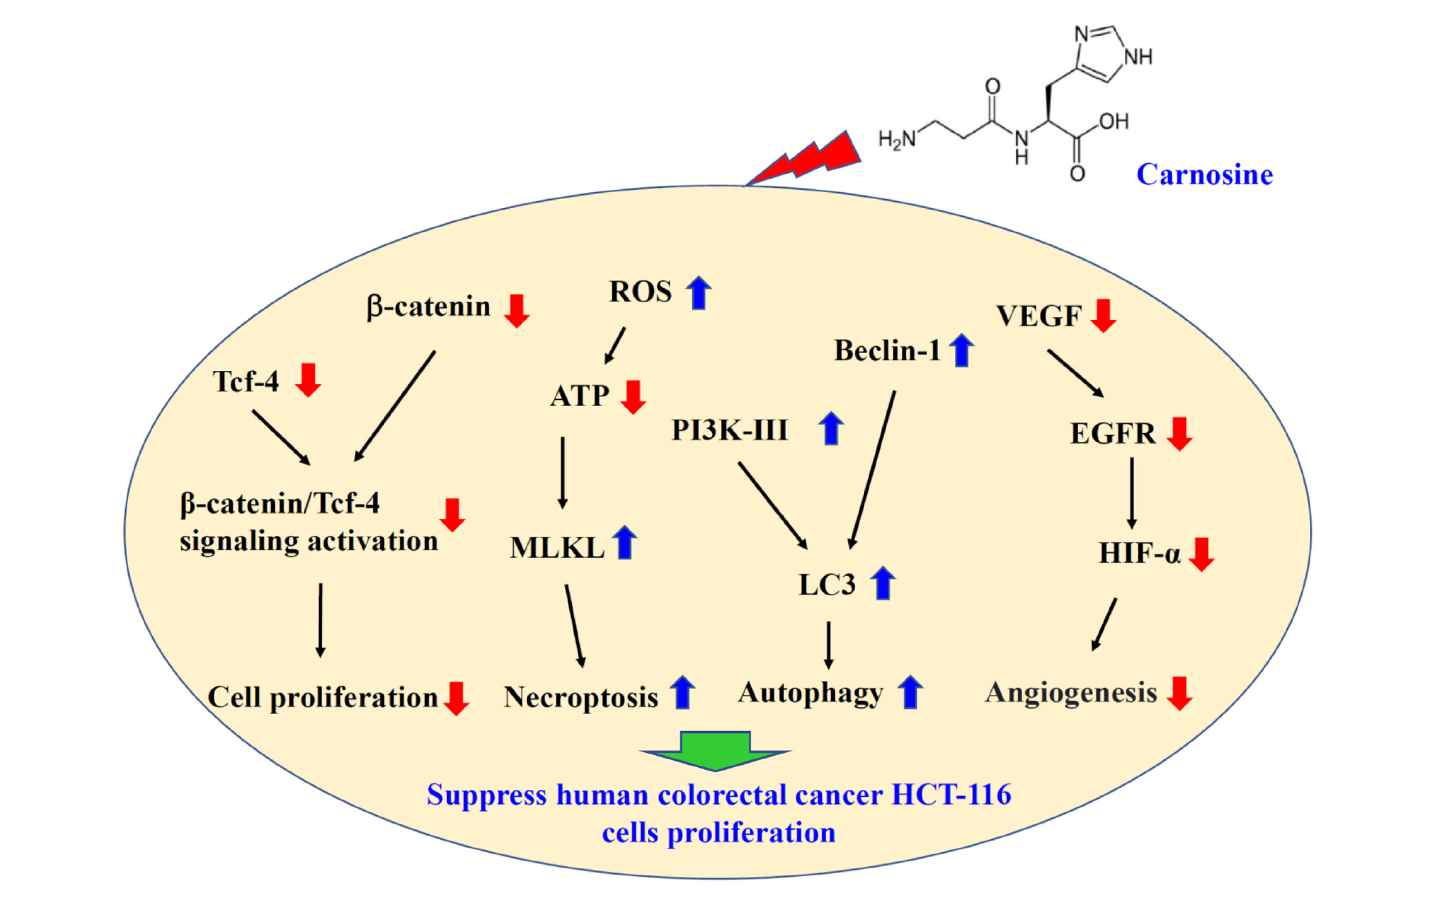 Carnosine suppresses human colorectal cancer cell proliferation
by inducing necroptosis and autophagy and reducing angiogenesis